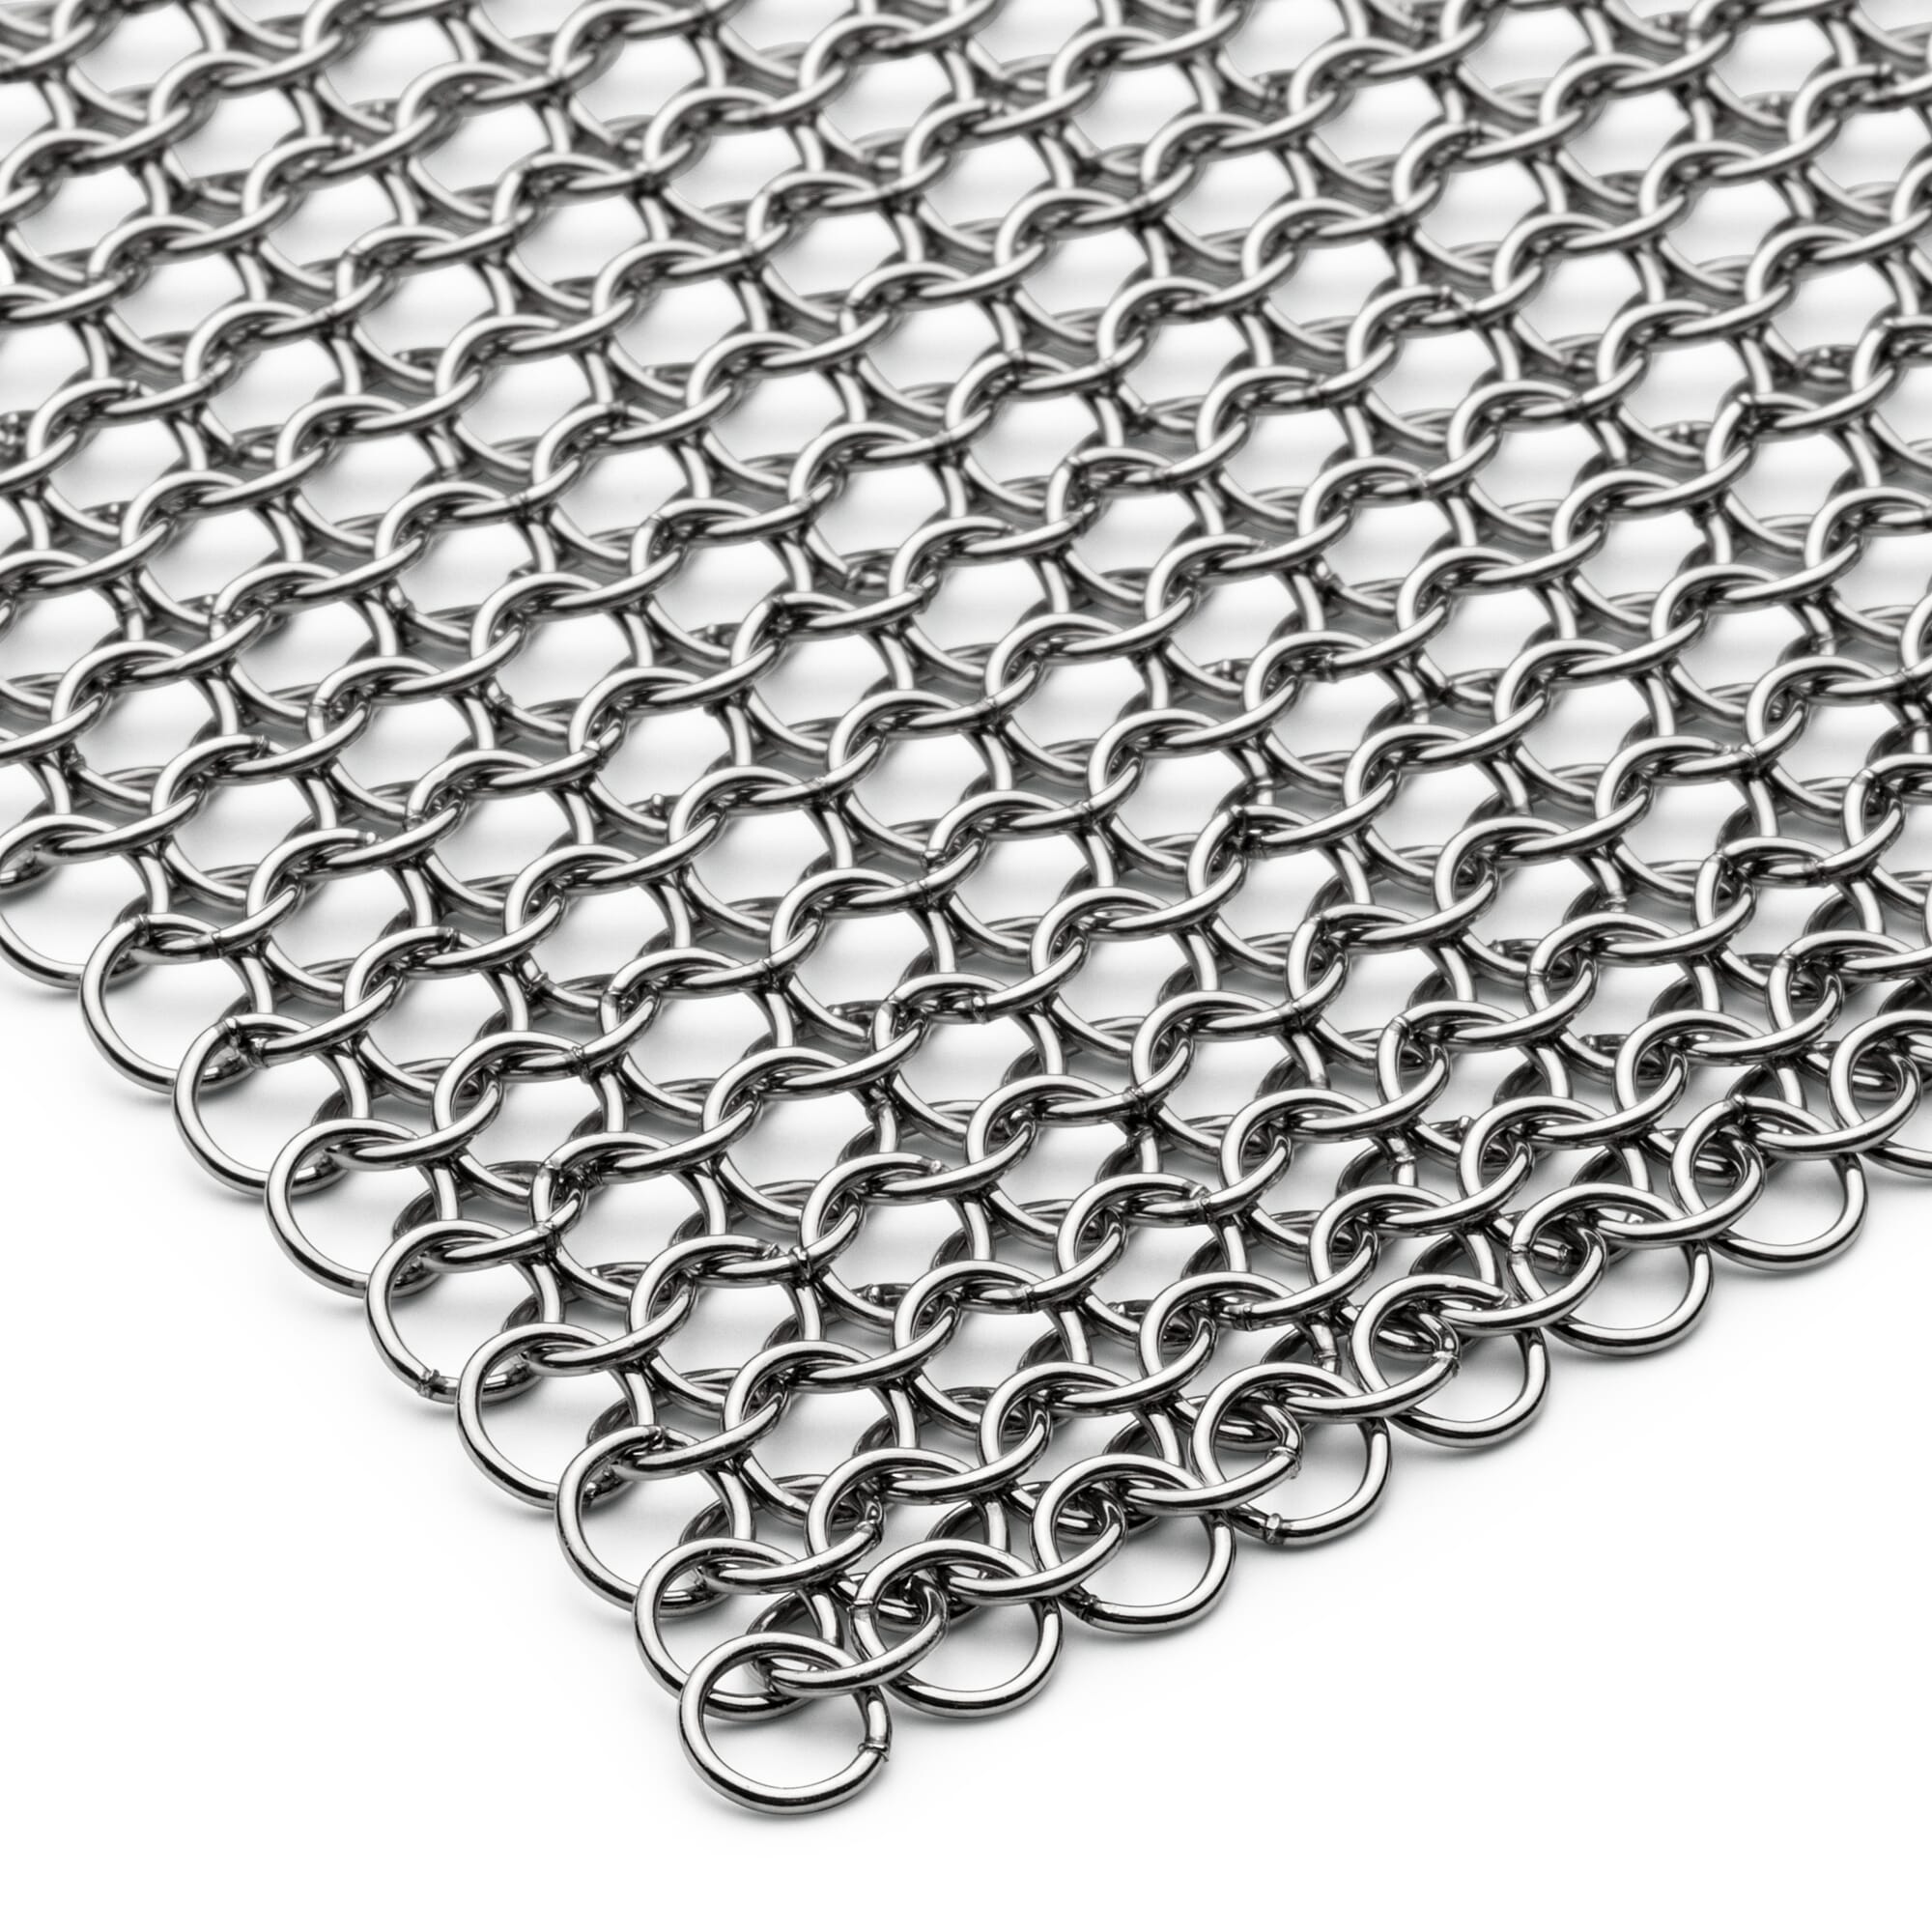 Cleaning cloth stainless steel